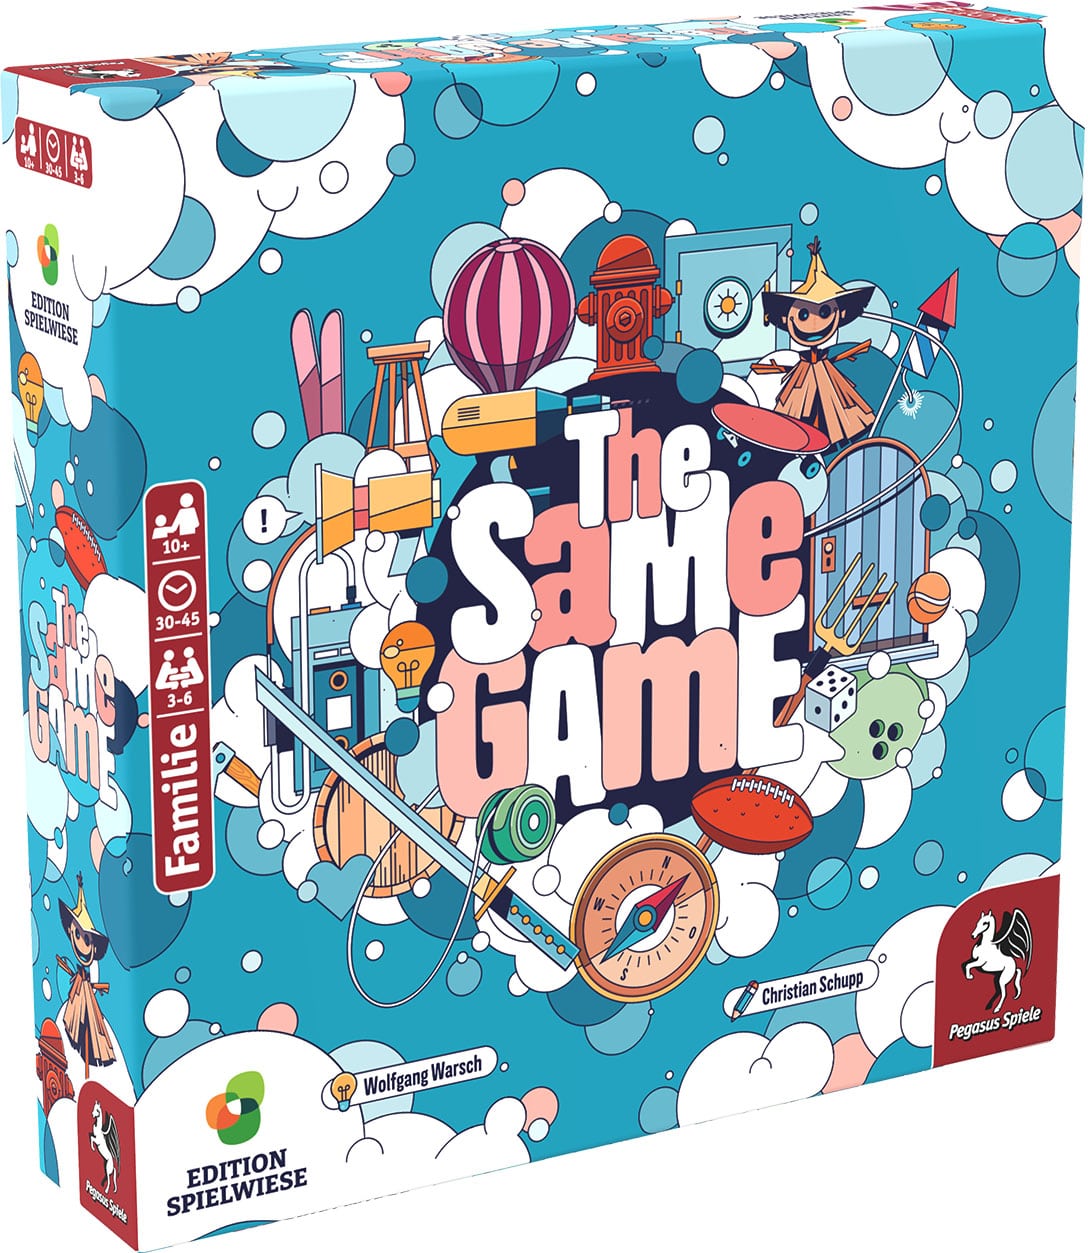 The Same Game (Edition Spielwiese)